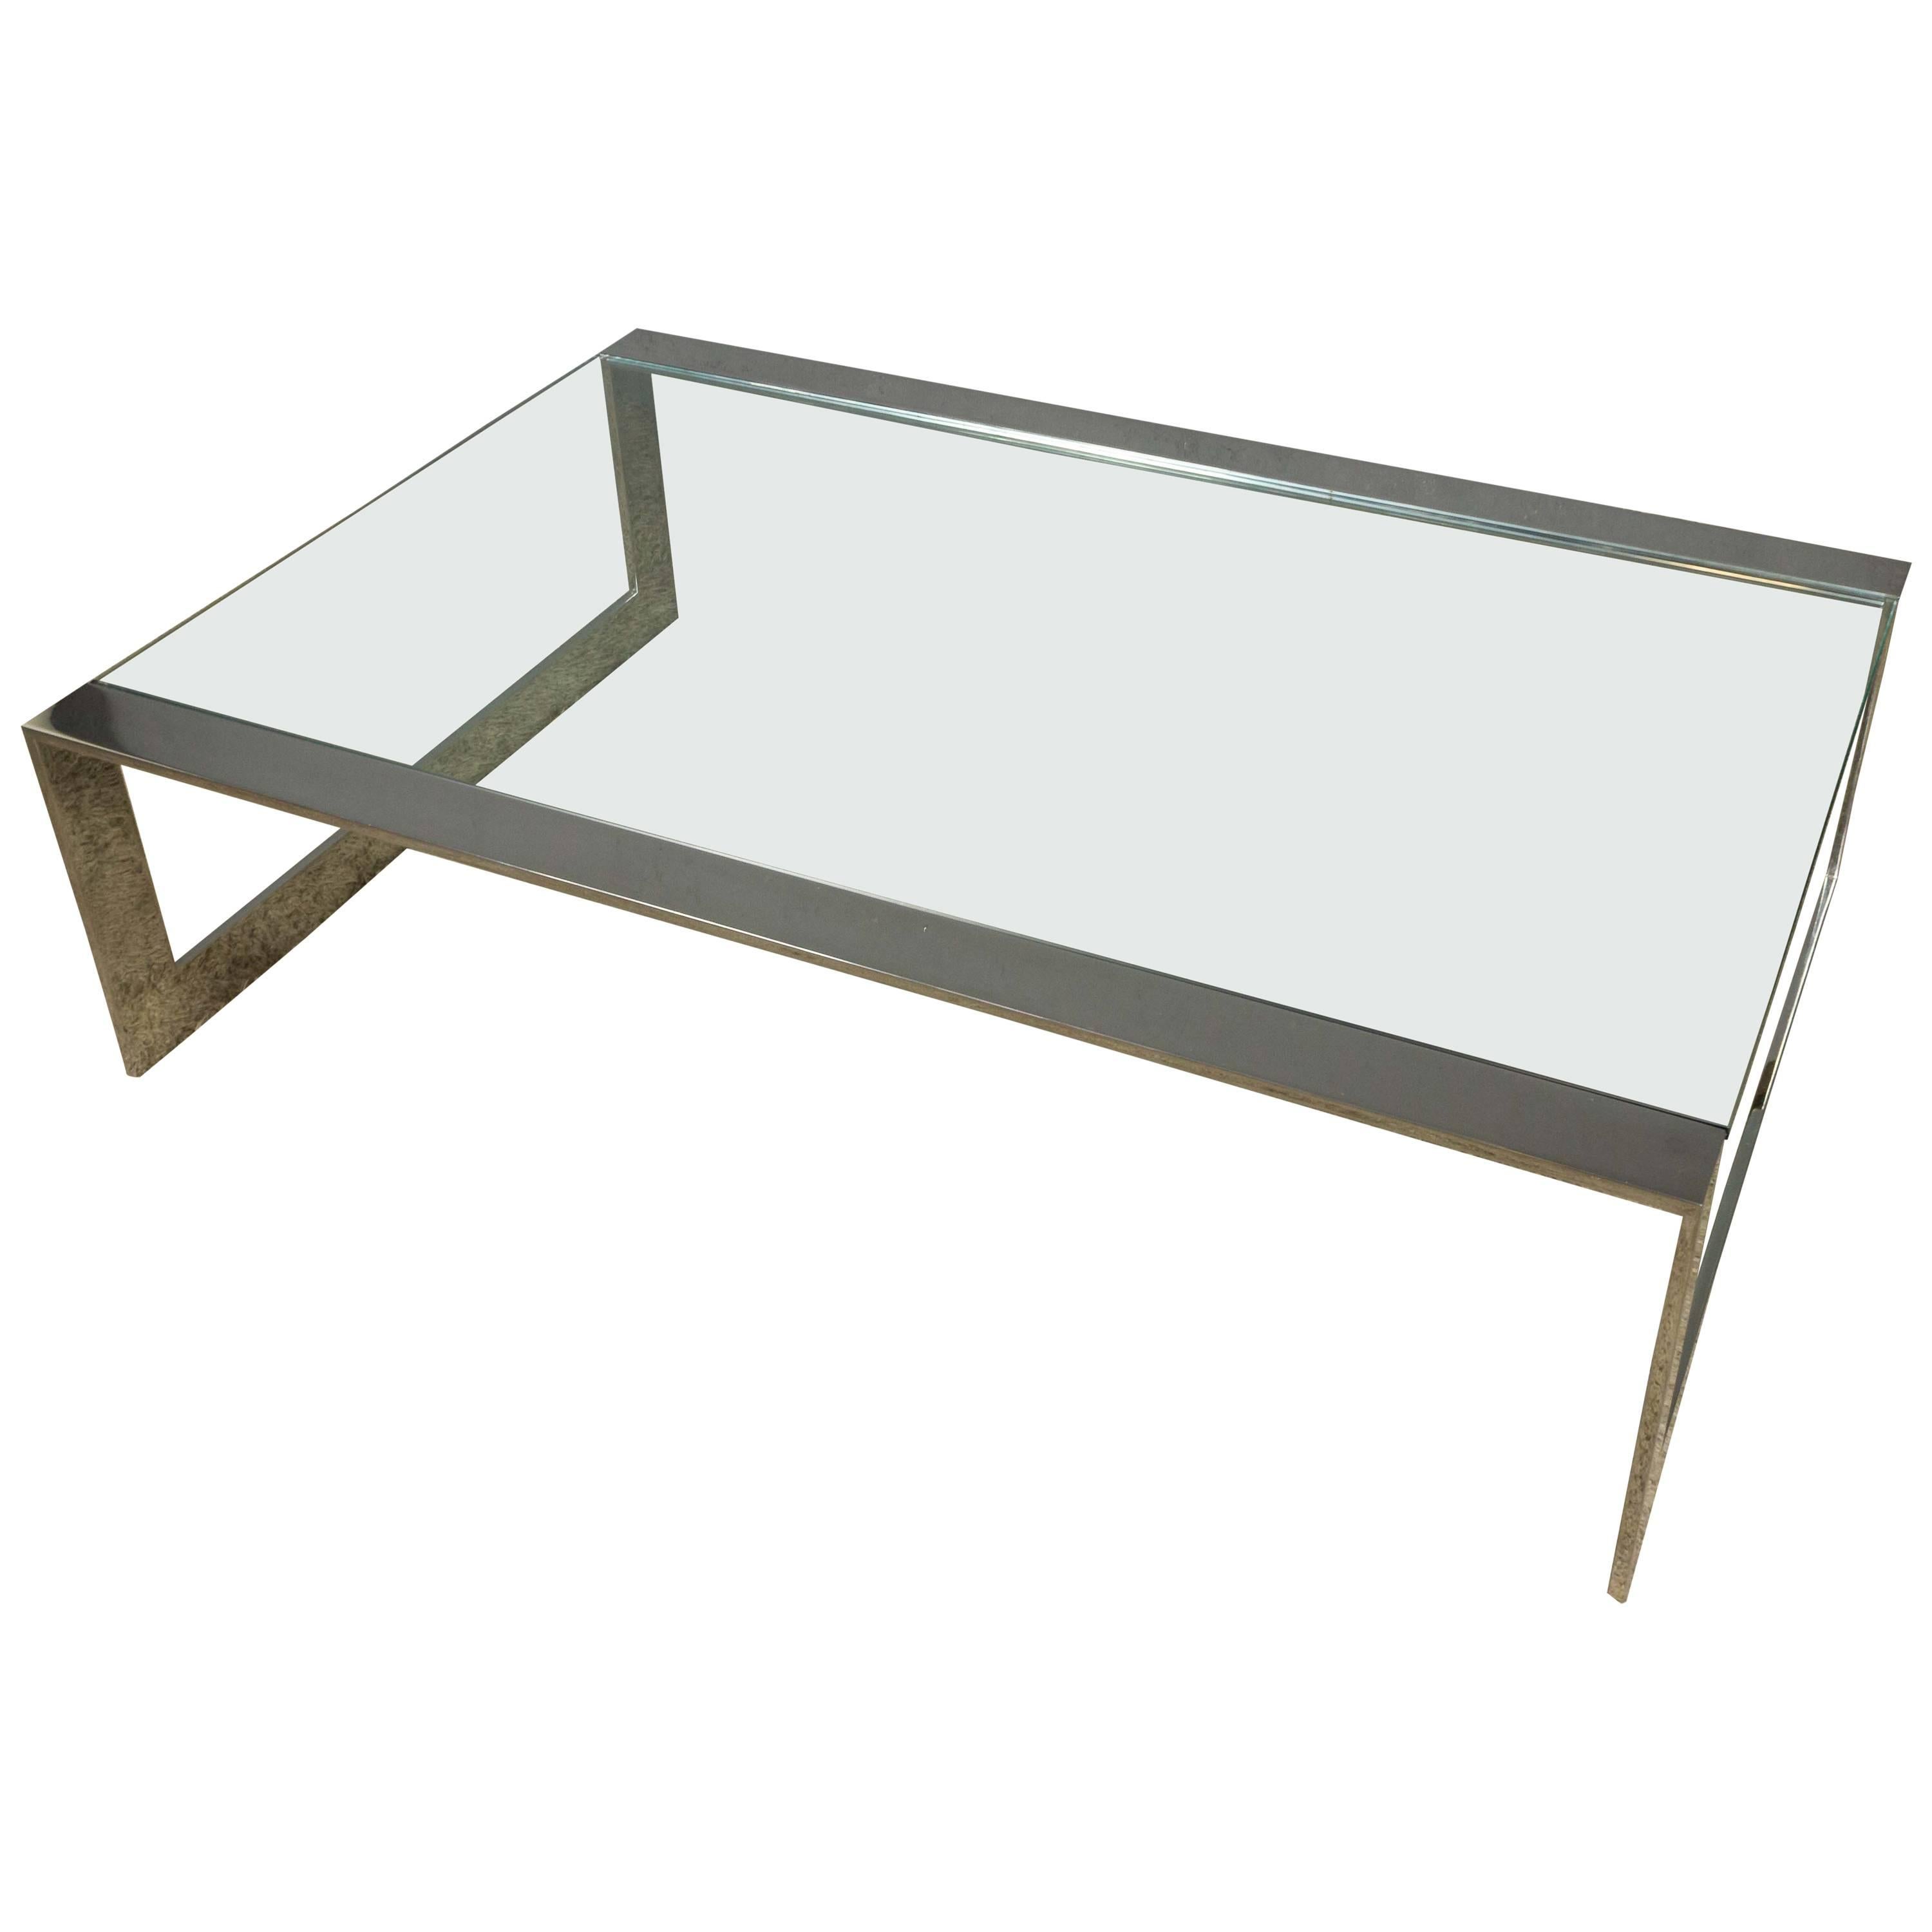 1970s Polished Steel and Glass Coffee Table For Sale